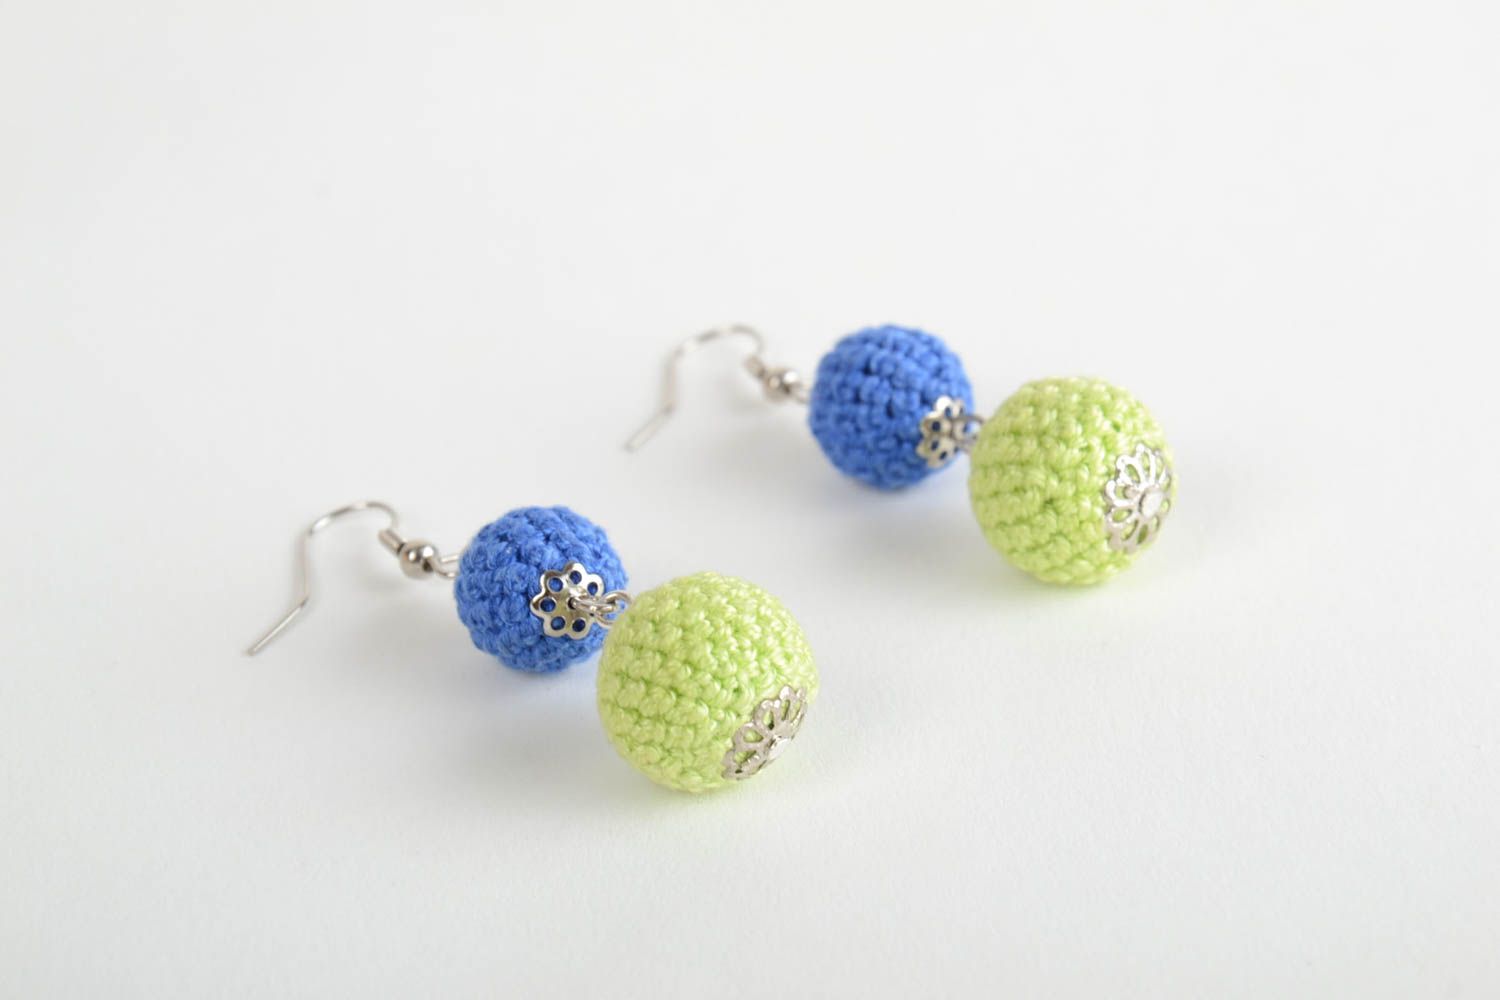 Handmade earrings with beads crocheted over with yellow and blue threads photo 4